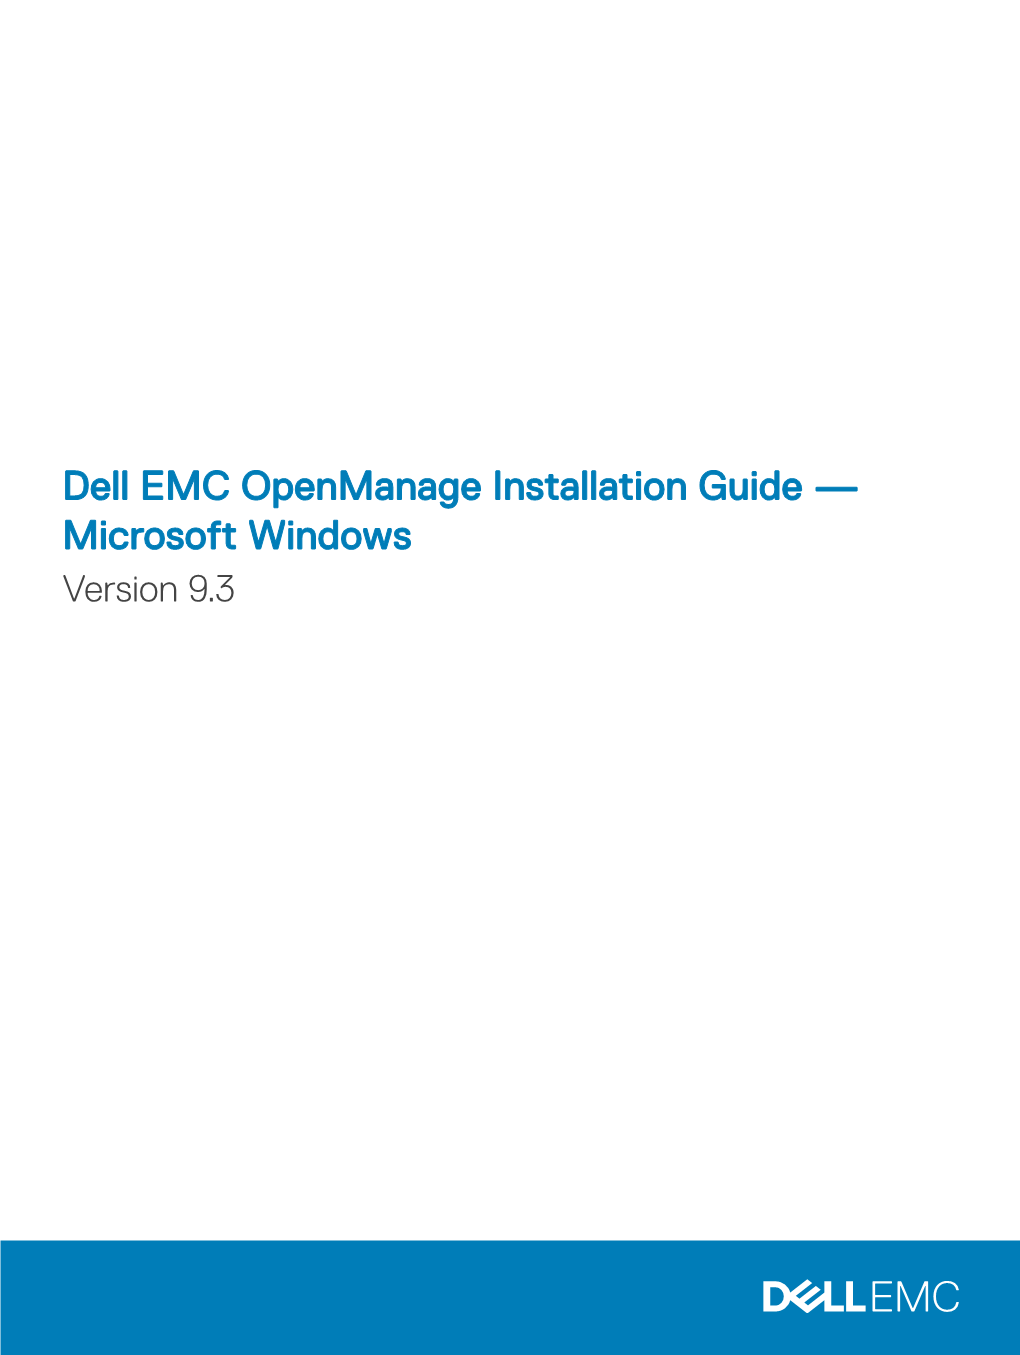 Dell EMC Openmanage Installation Guide — Microsoft Windows Version 9.3 Notes, Cautions, and Warnings